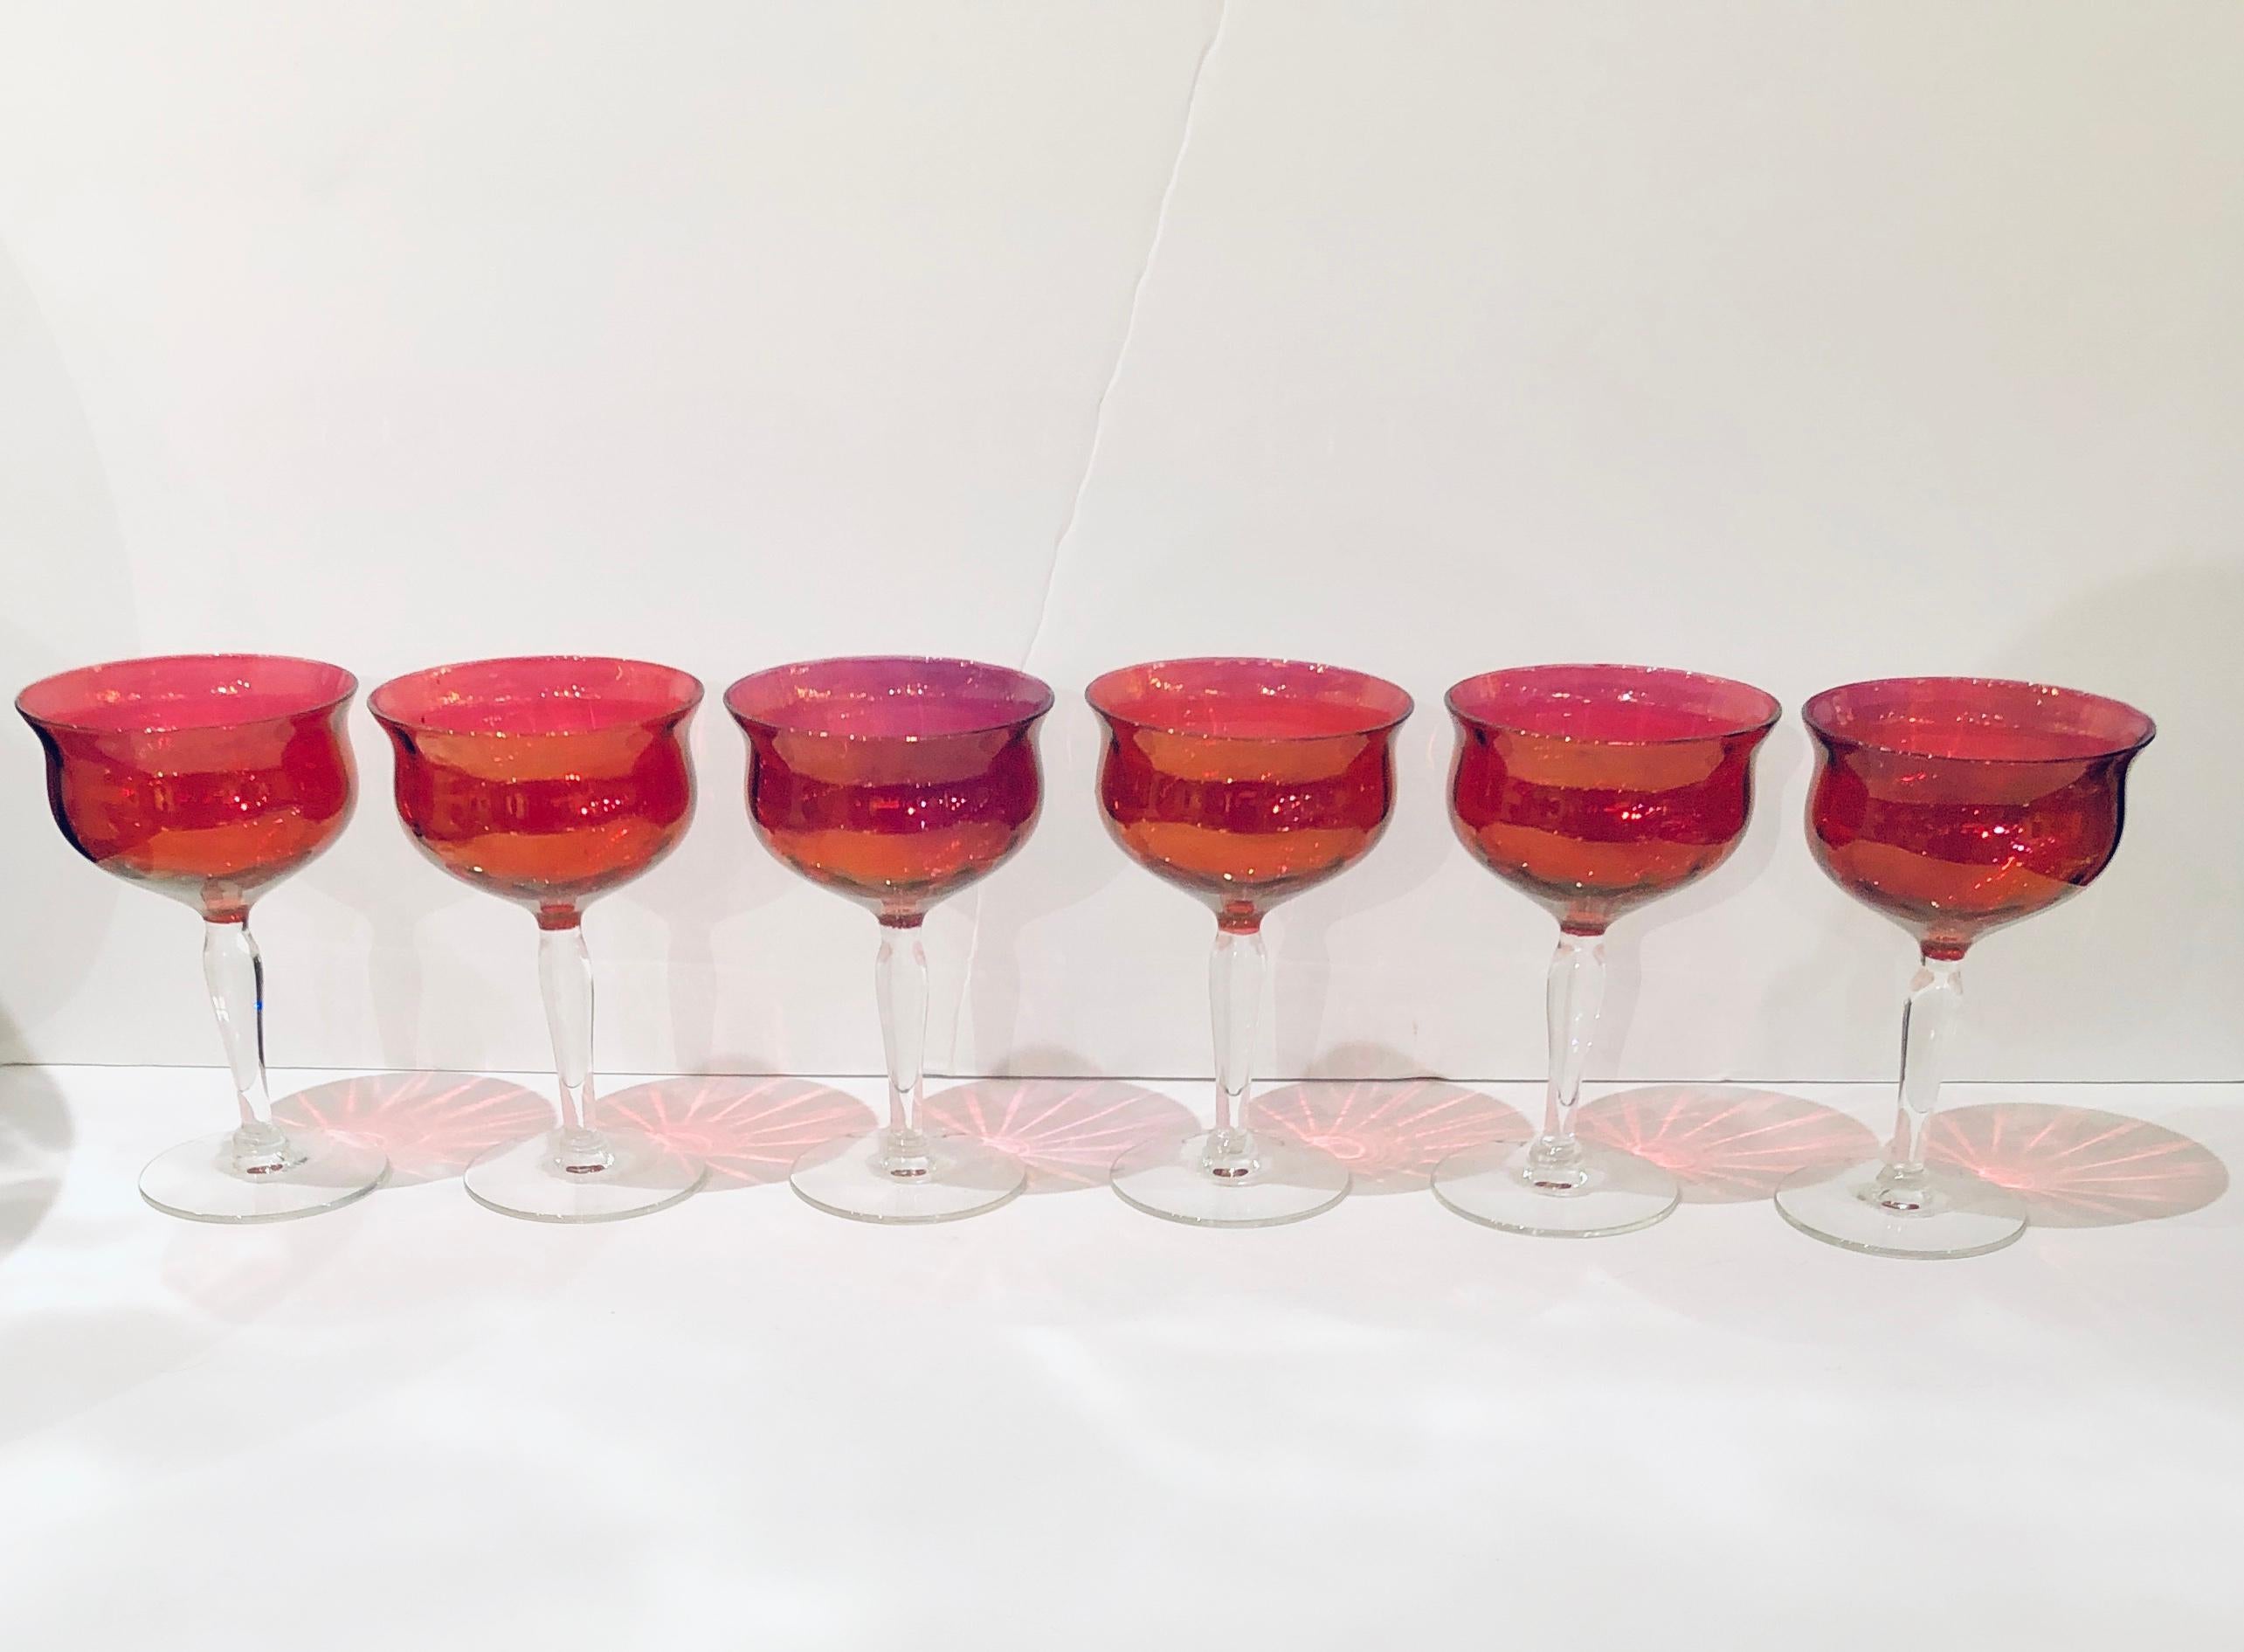 Offered is a set of six ruby red with clear stem vintage French crystal champagne coupes' glasses / barware bringing to mind props worthy for golden age movies such as 